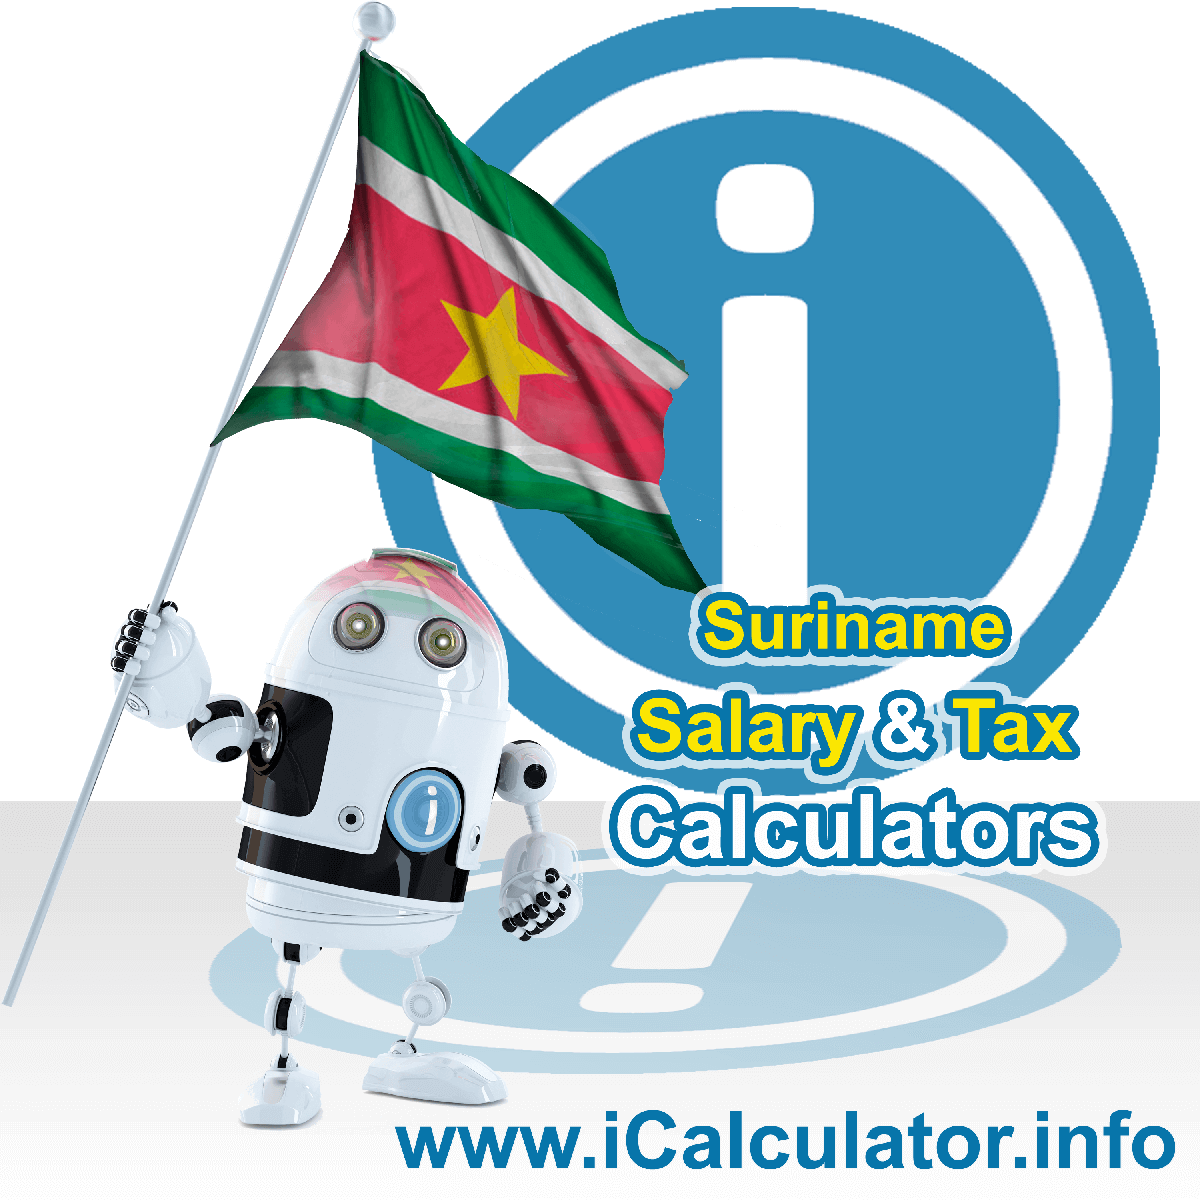 Suriname Wage Calculator. This image shows the Suriname flag and information relating to the tax formula for the Suriname Tax Calculator